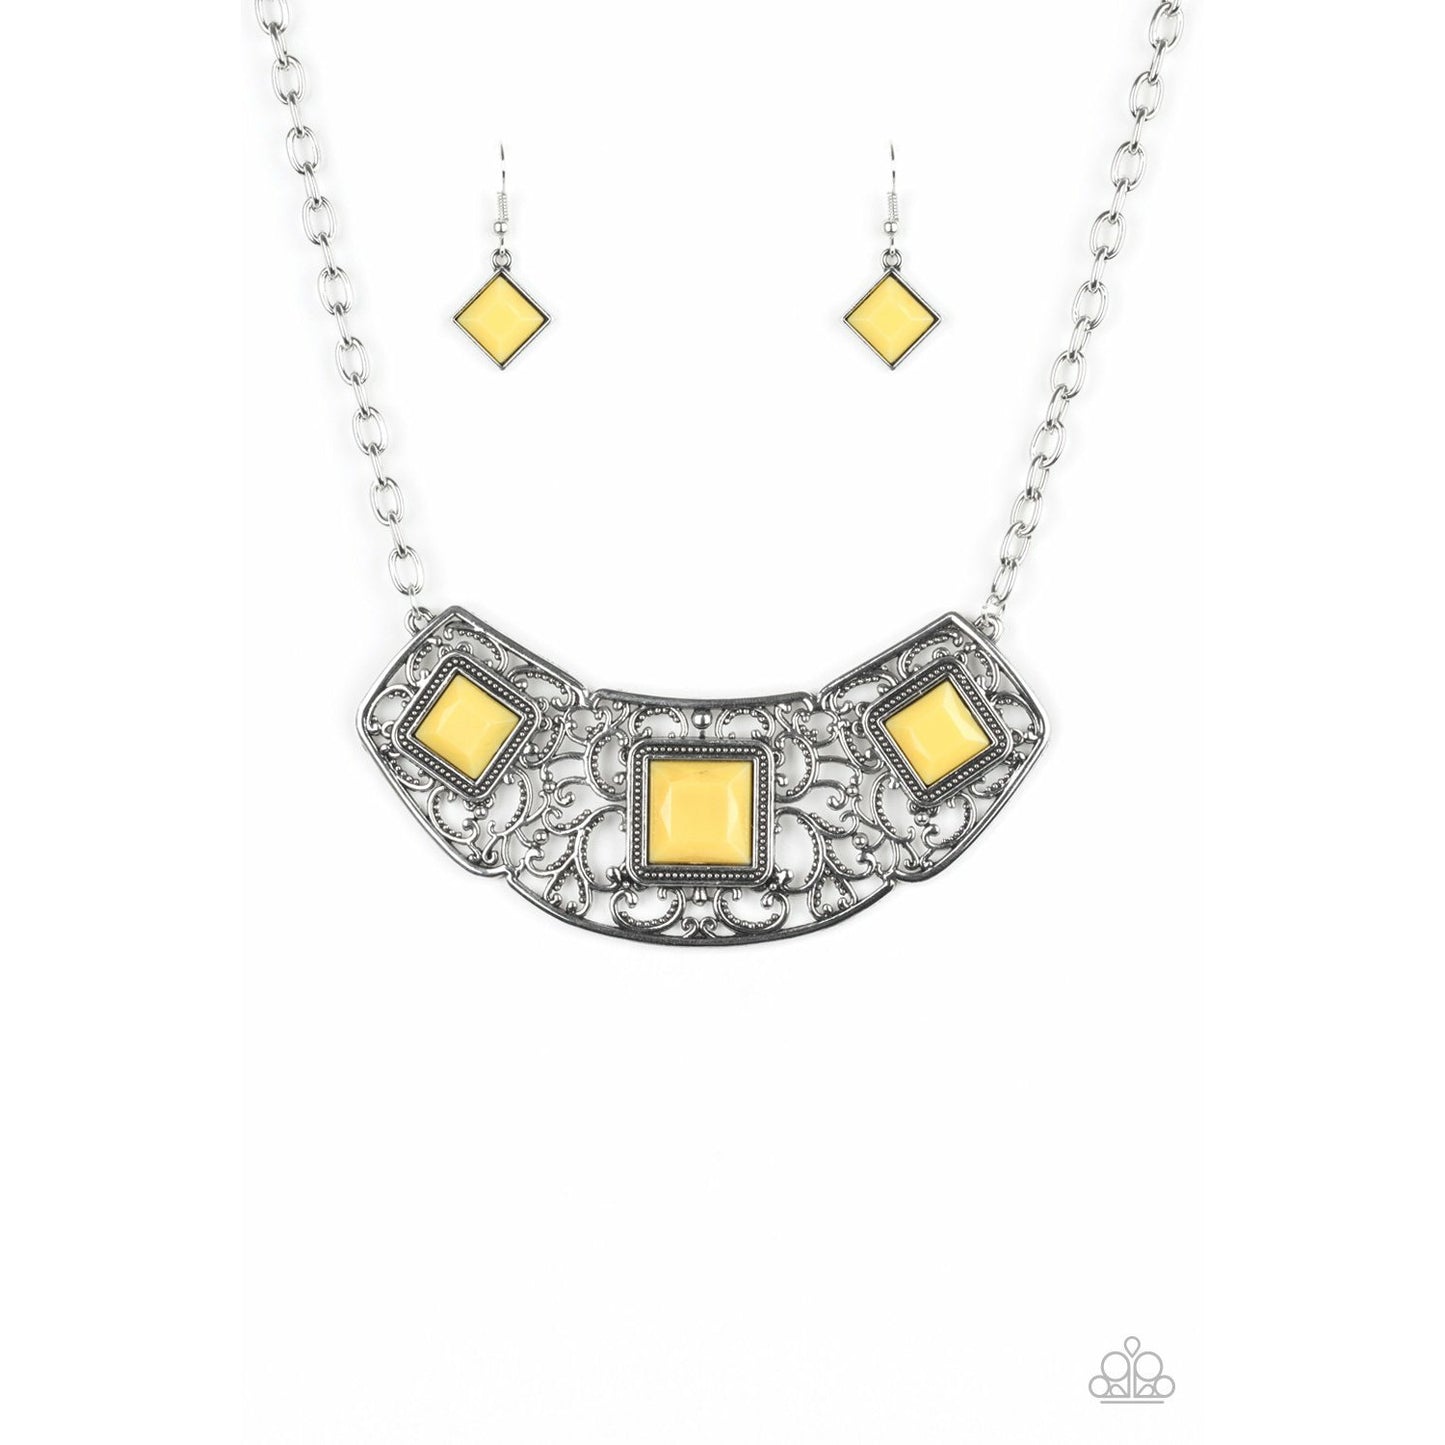 Feeling Inde-PENDANT - Yellow necklace